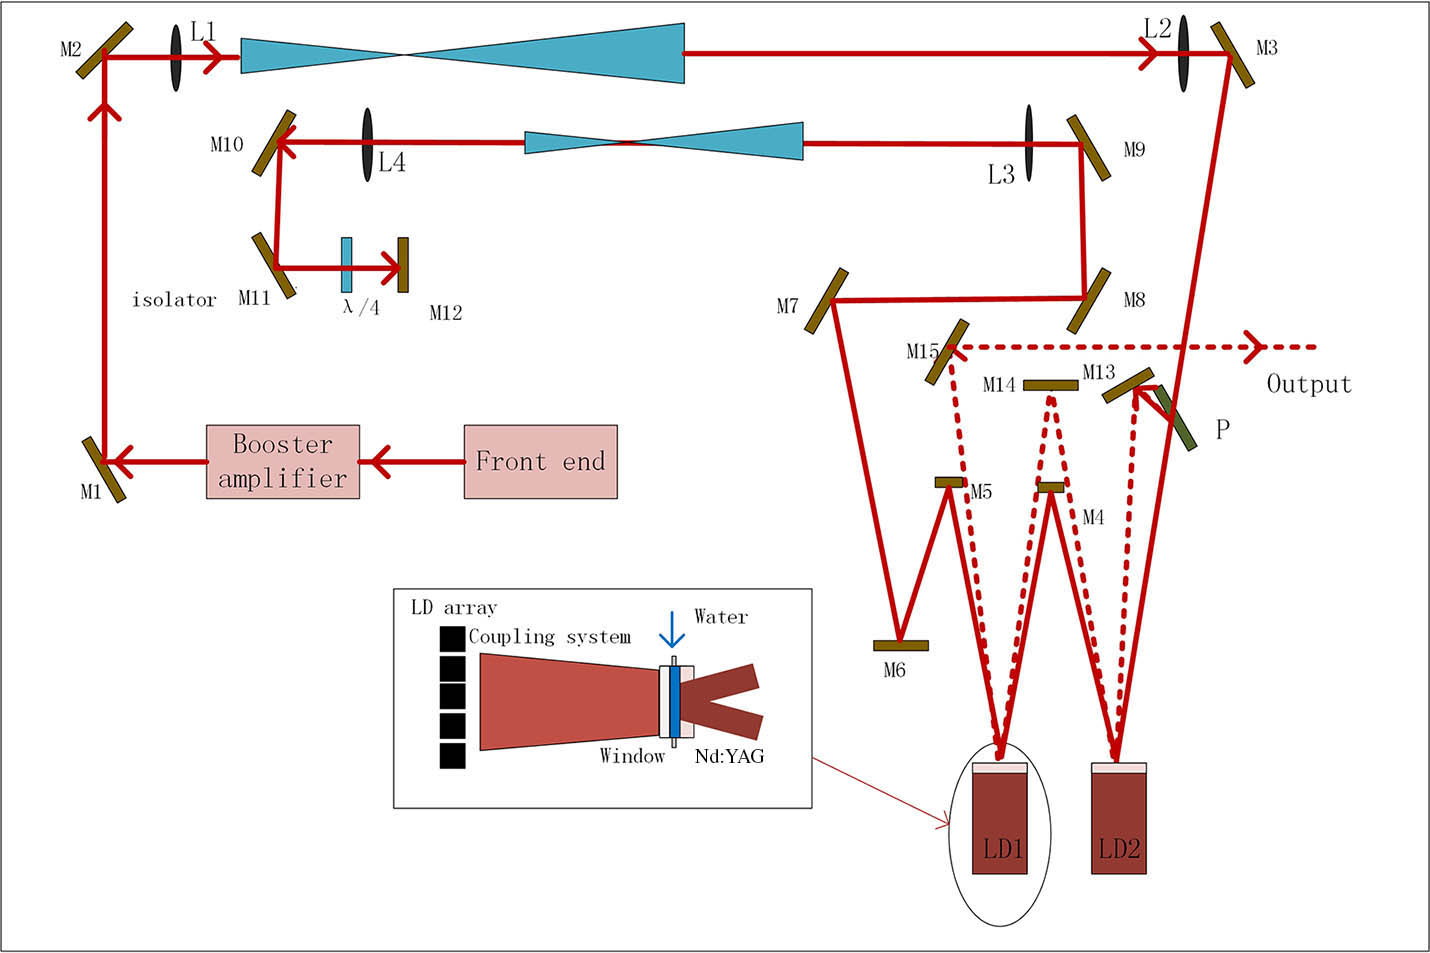 Light path schematic of the laser amplifier system: M1–M15, high reflection (HR) at 1064 nm.